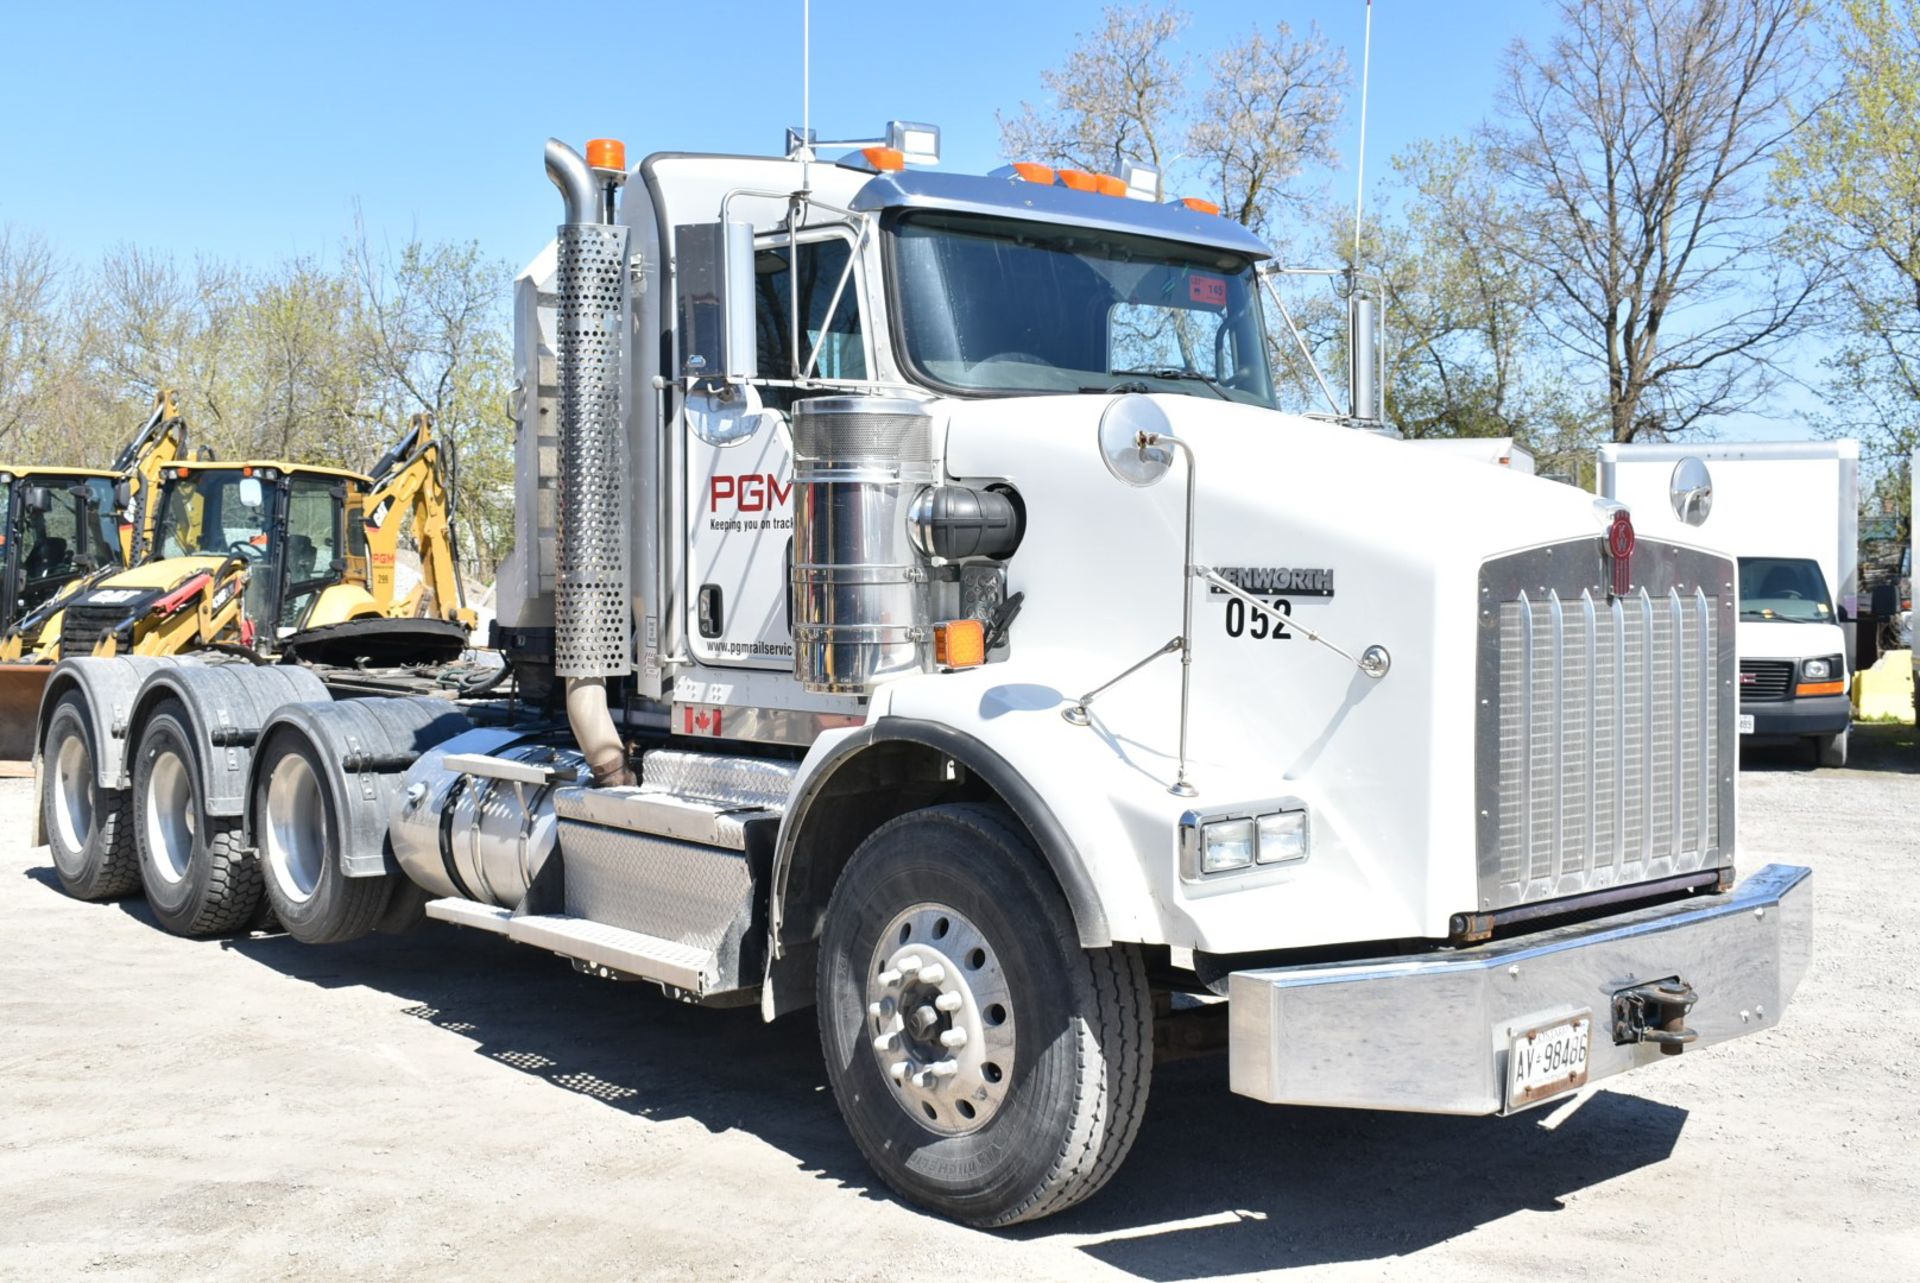 KENWORTH (2018) T800 TRI-DRIVE SEMI-TRACTOR TRUCK WITH DAY CAB, CUMMINS ISX-565 DIESEL ENGINE, - Image 5 of 16